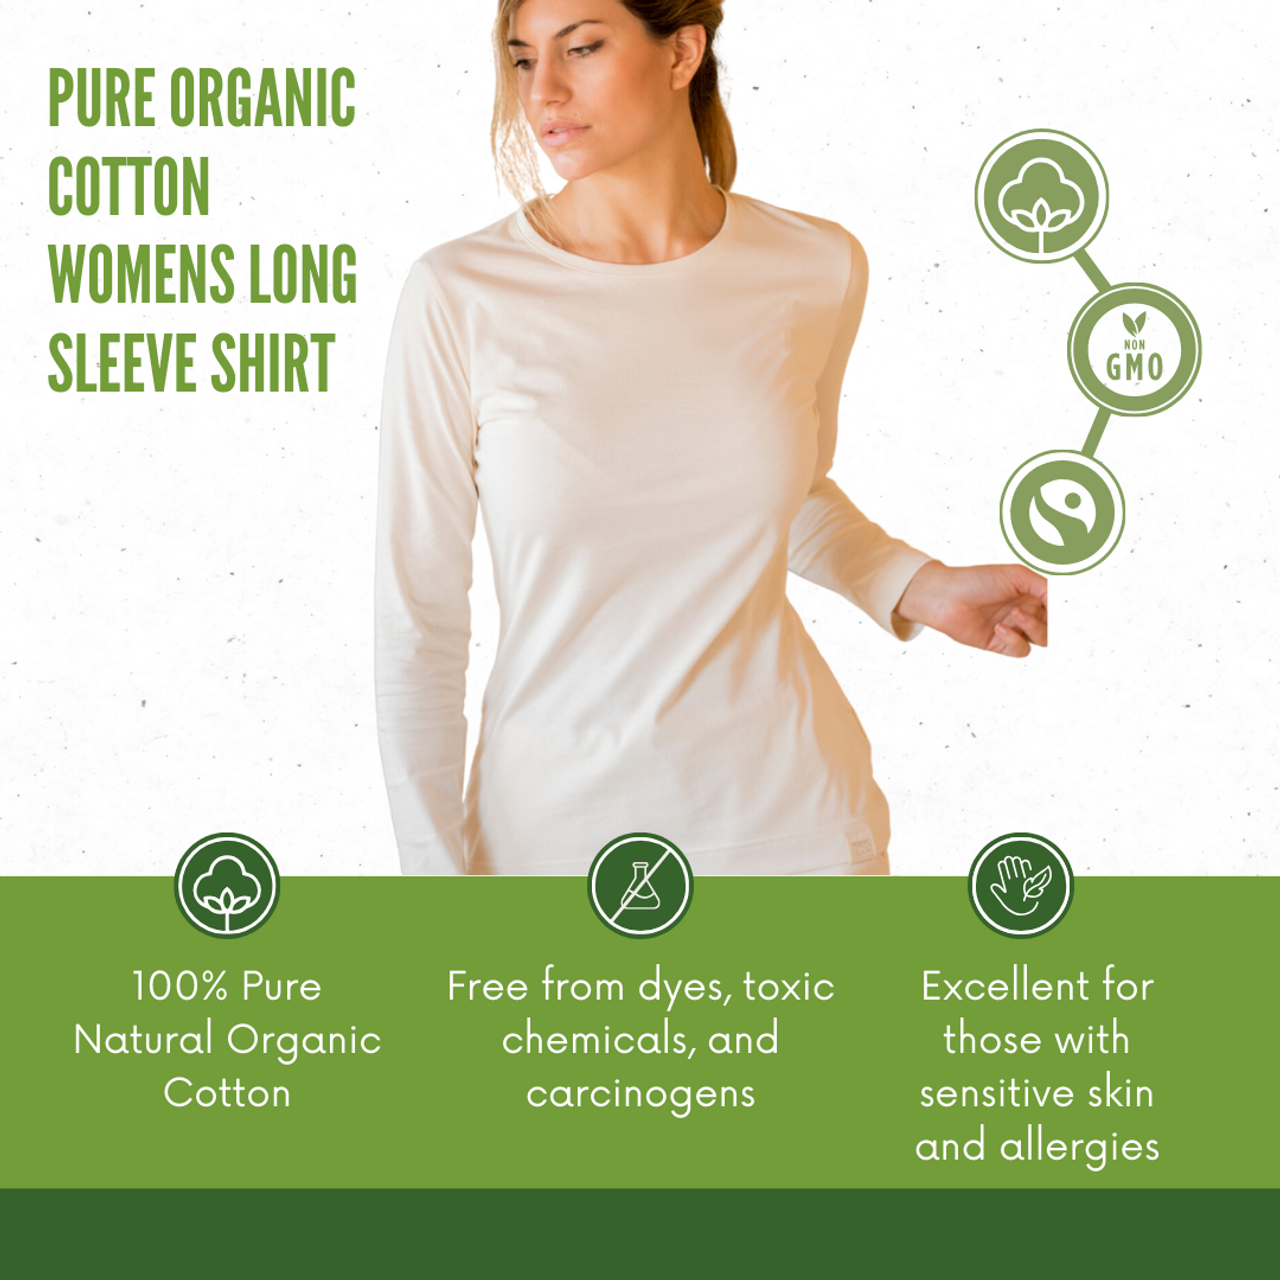 Unbleached fashion for sensitive skin, Women's shirts and underwear made  of organic cotton